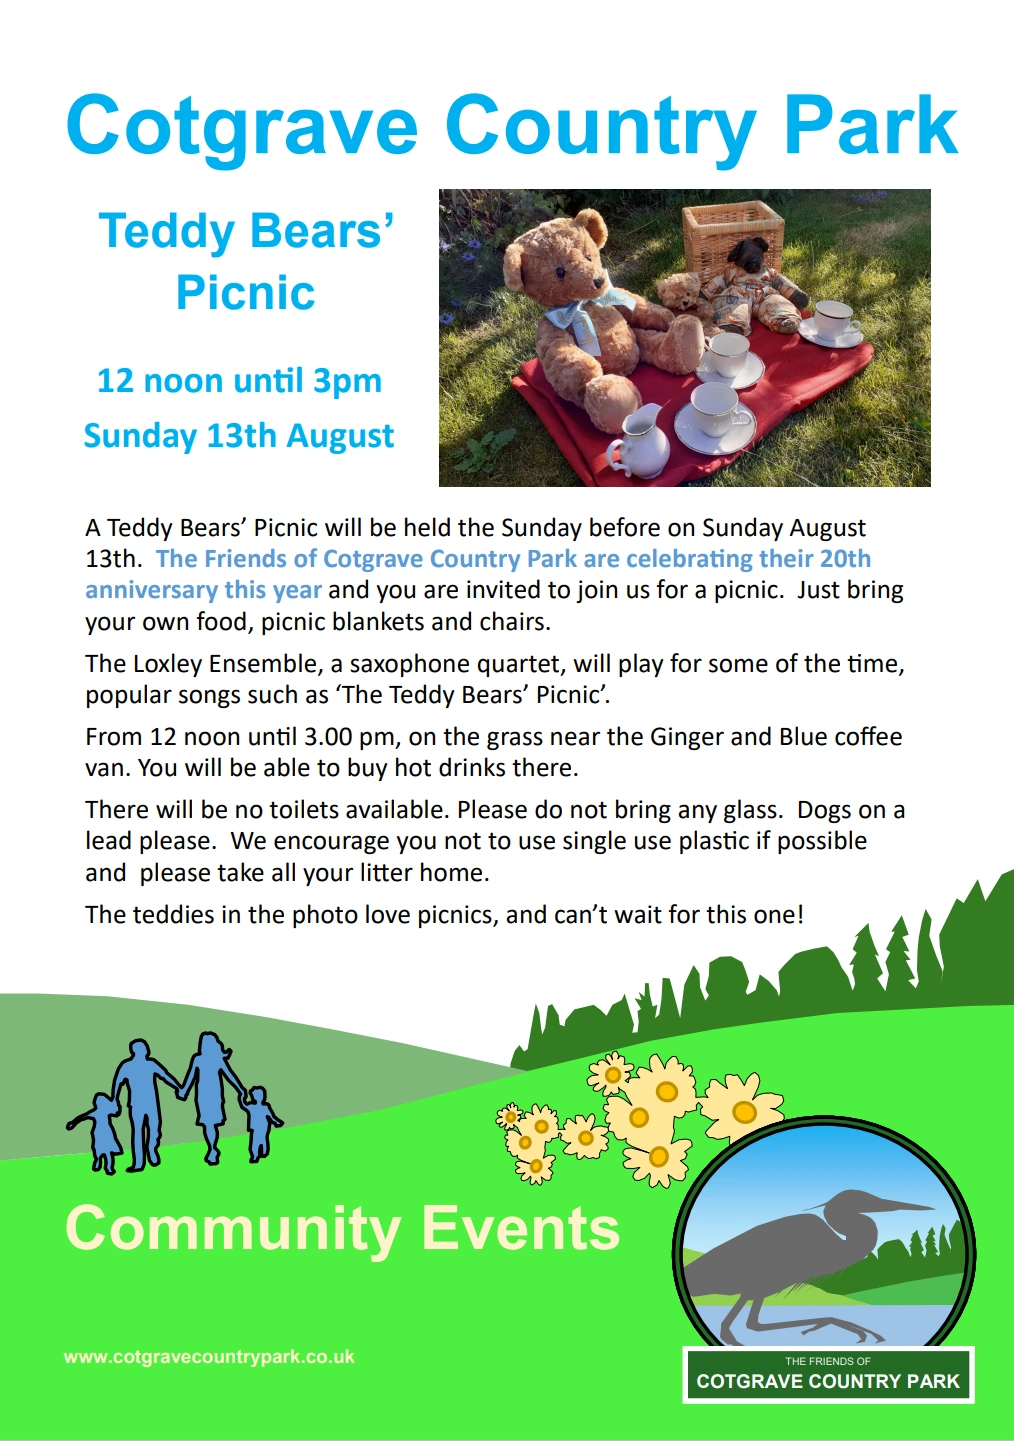 Poster advertising the Teddy Bears' Picnic